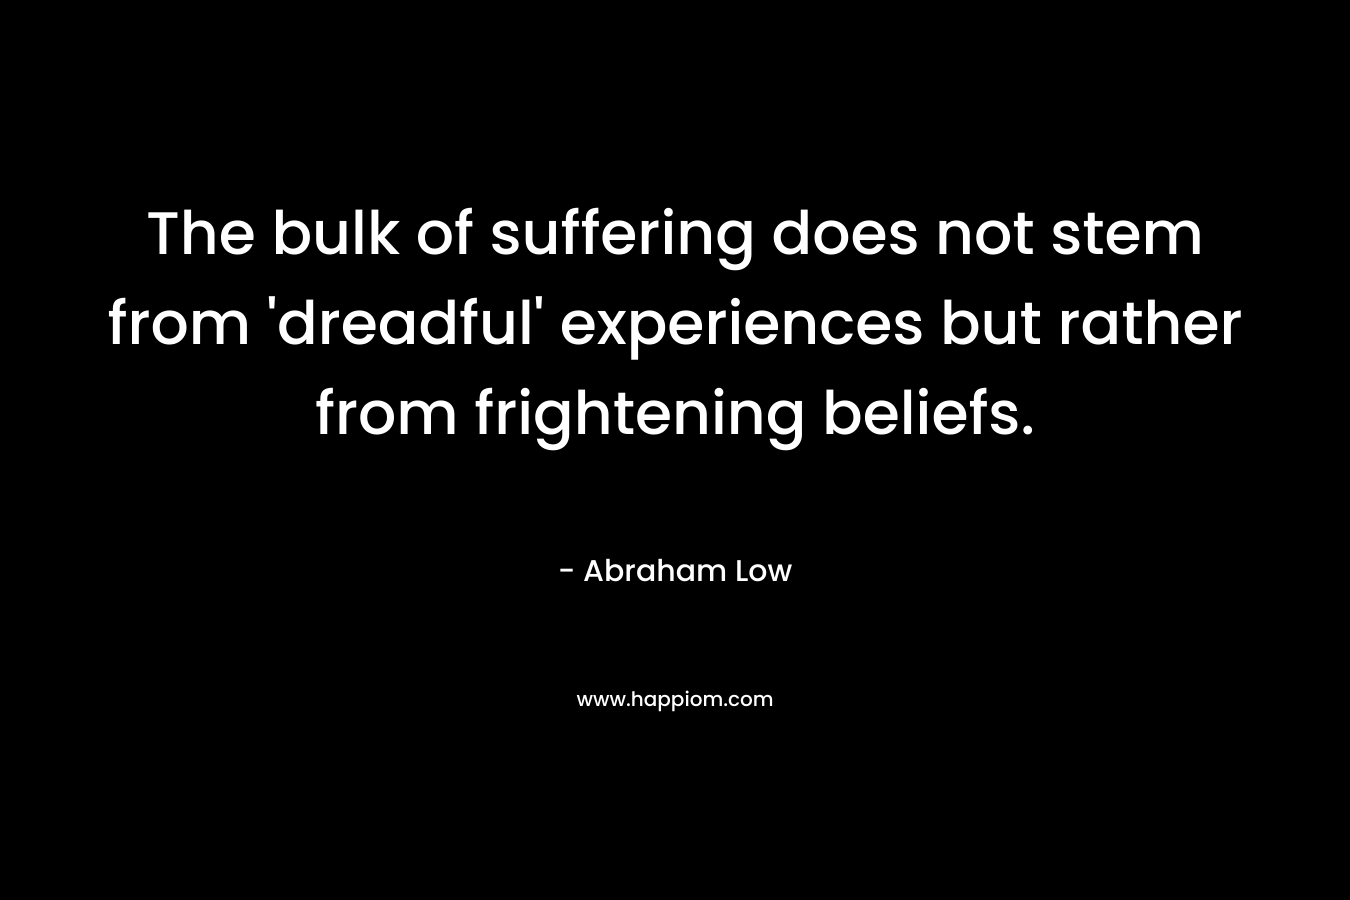 The bulk of suffering does not stem from 'dreadful' experiences but rather from frightening beliefs.